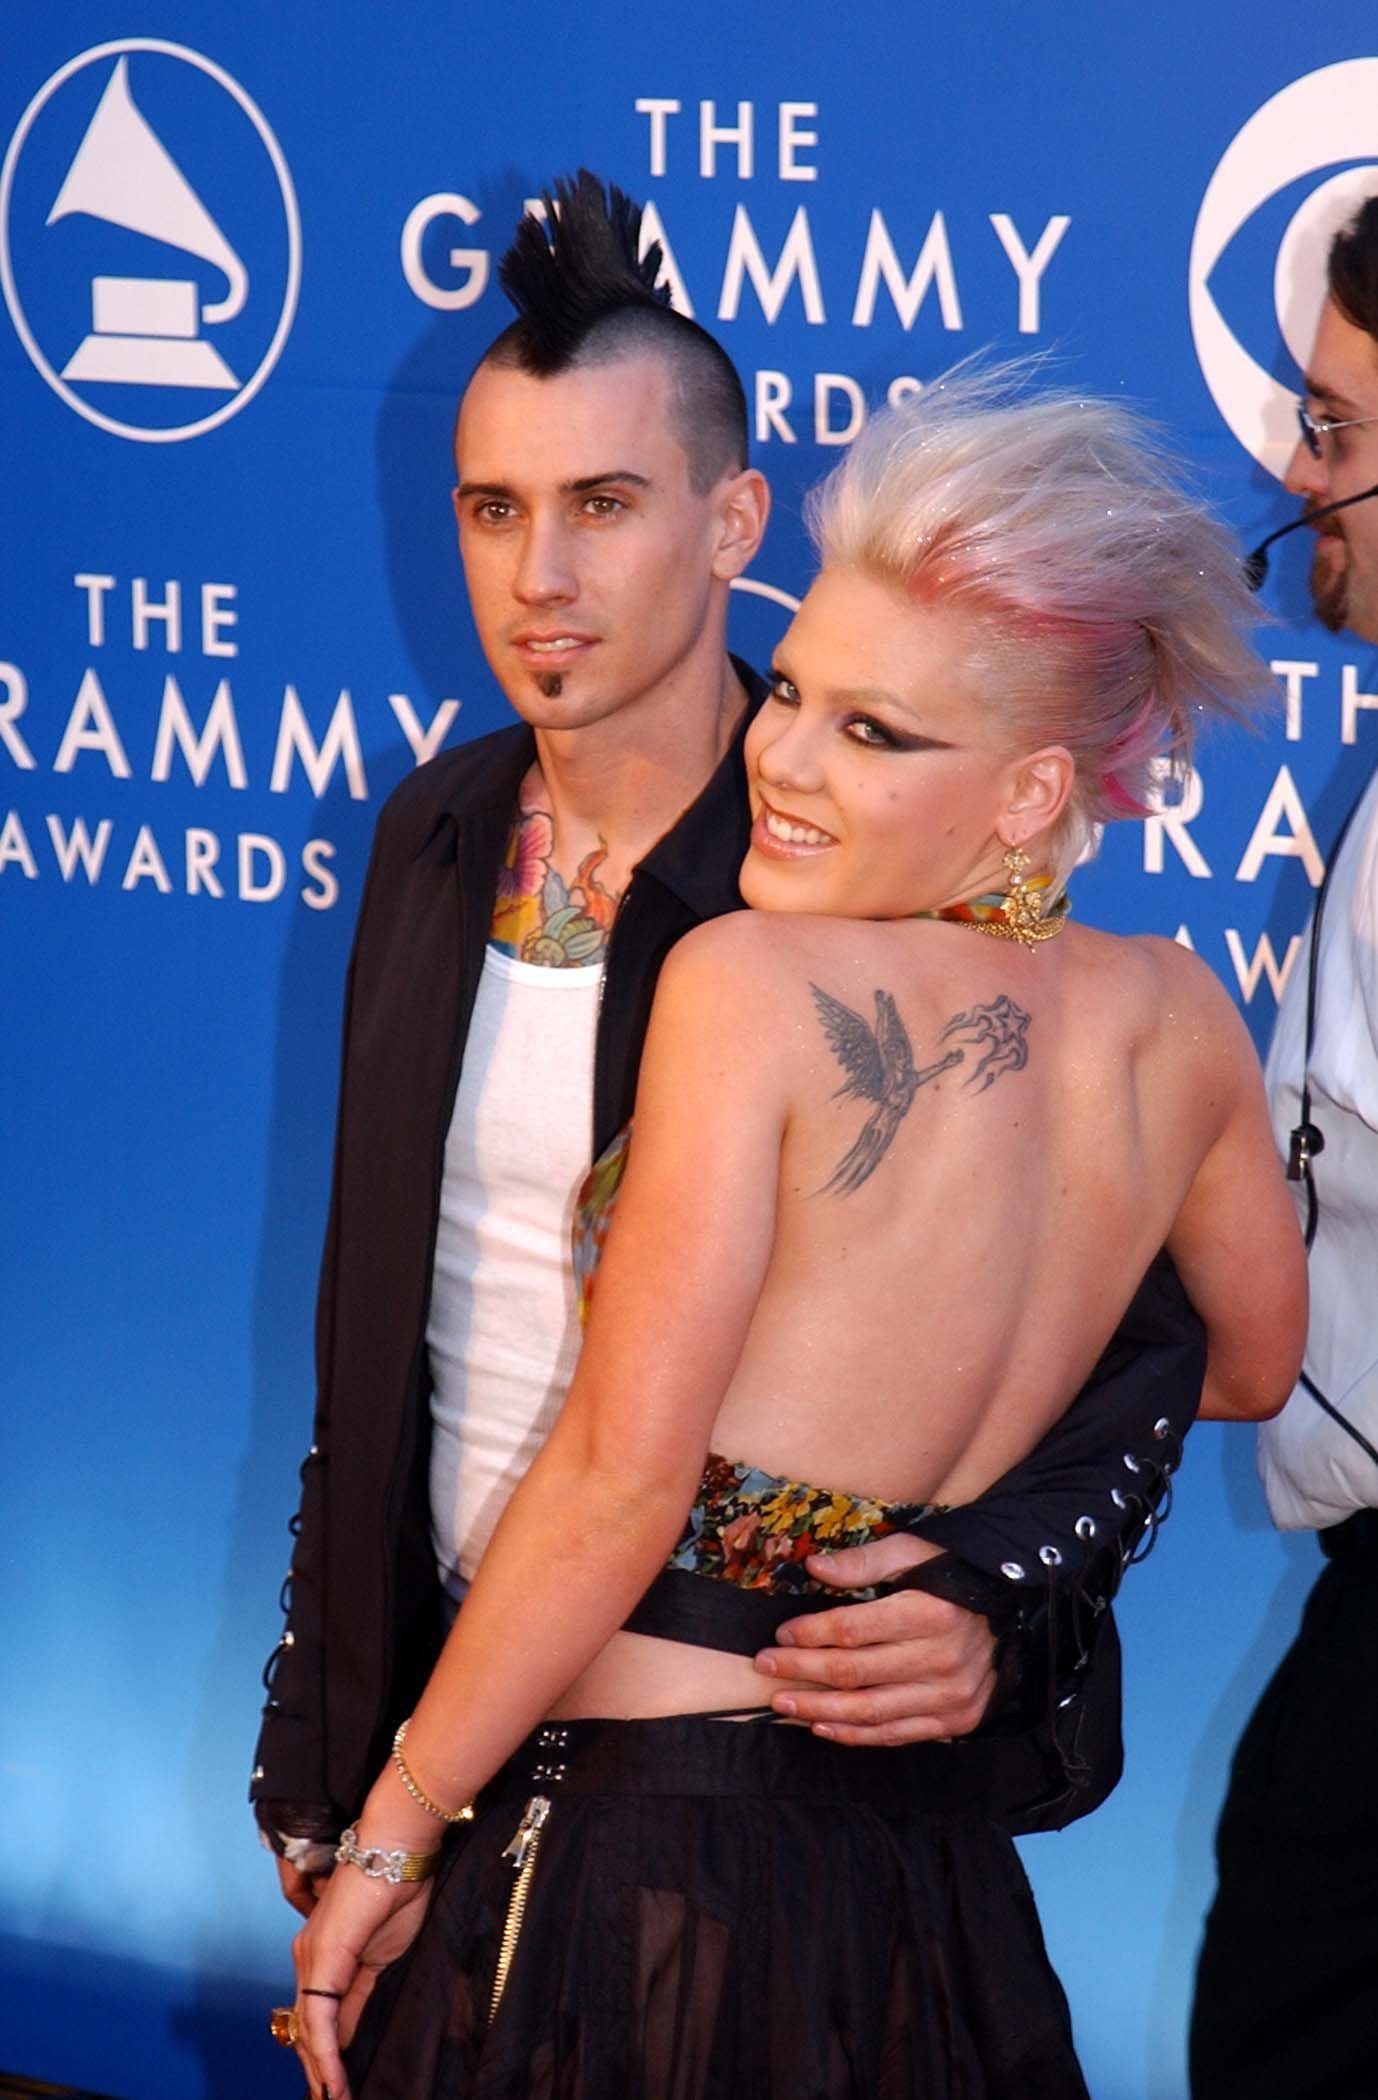 Carey Hart and Pink during the 44th Annual Grammy Awards in Los Angeles, California, on February 27, 2002. | Source: Jeff Kravitz/FilmMagic, Inc/Getty Images